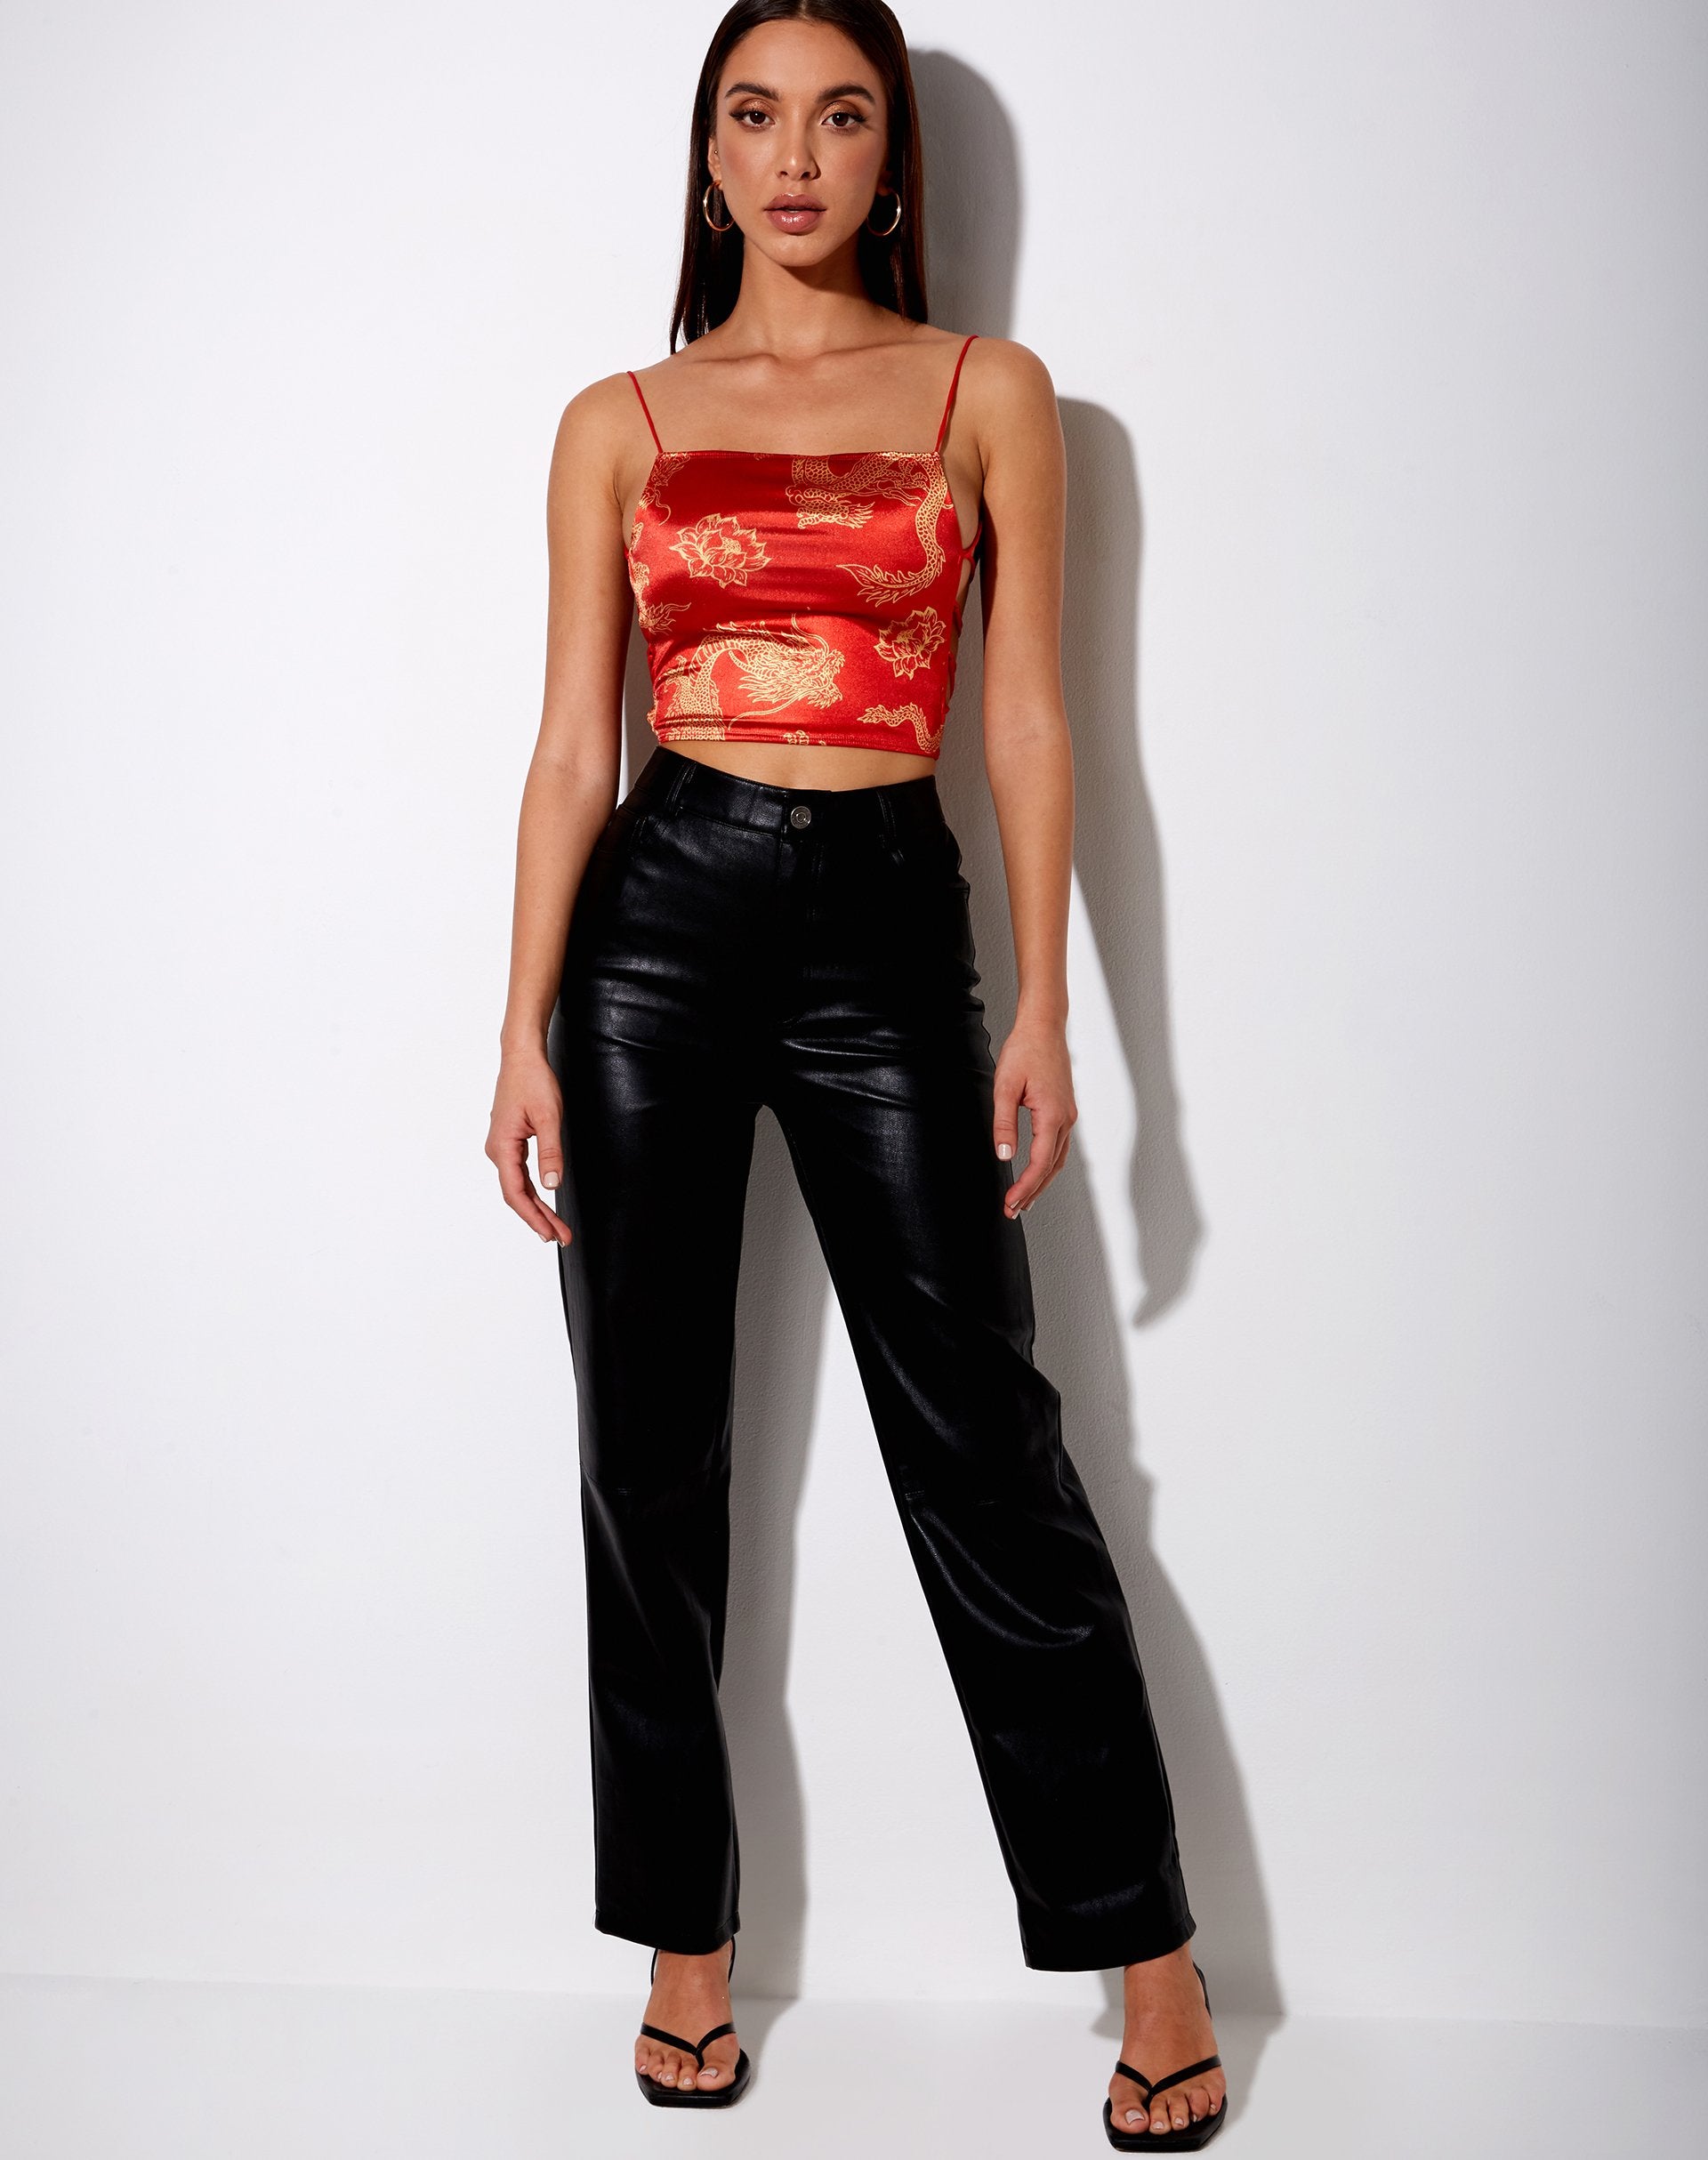 Image of Ozka Crop Top in Dragon Flower Red and Gold